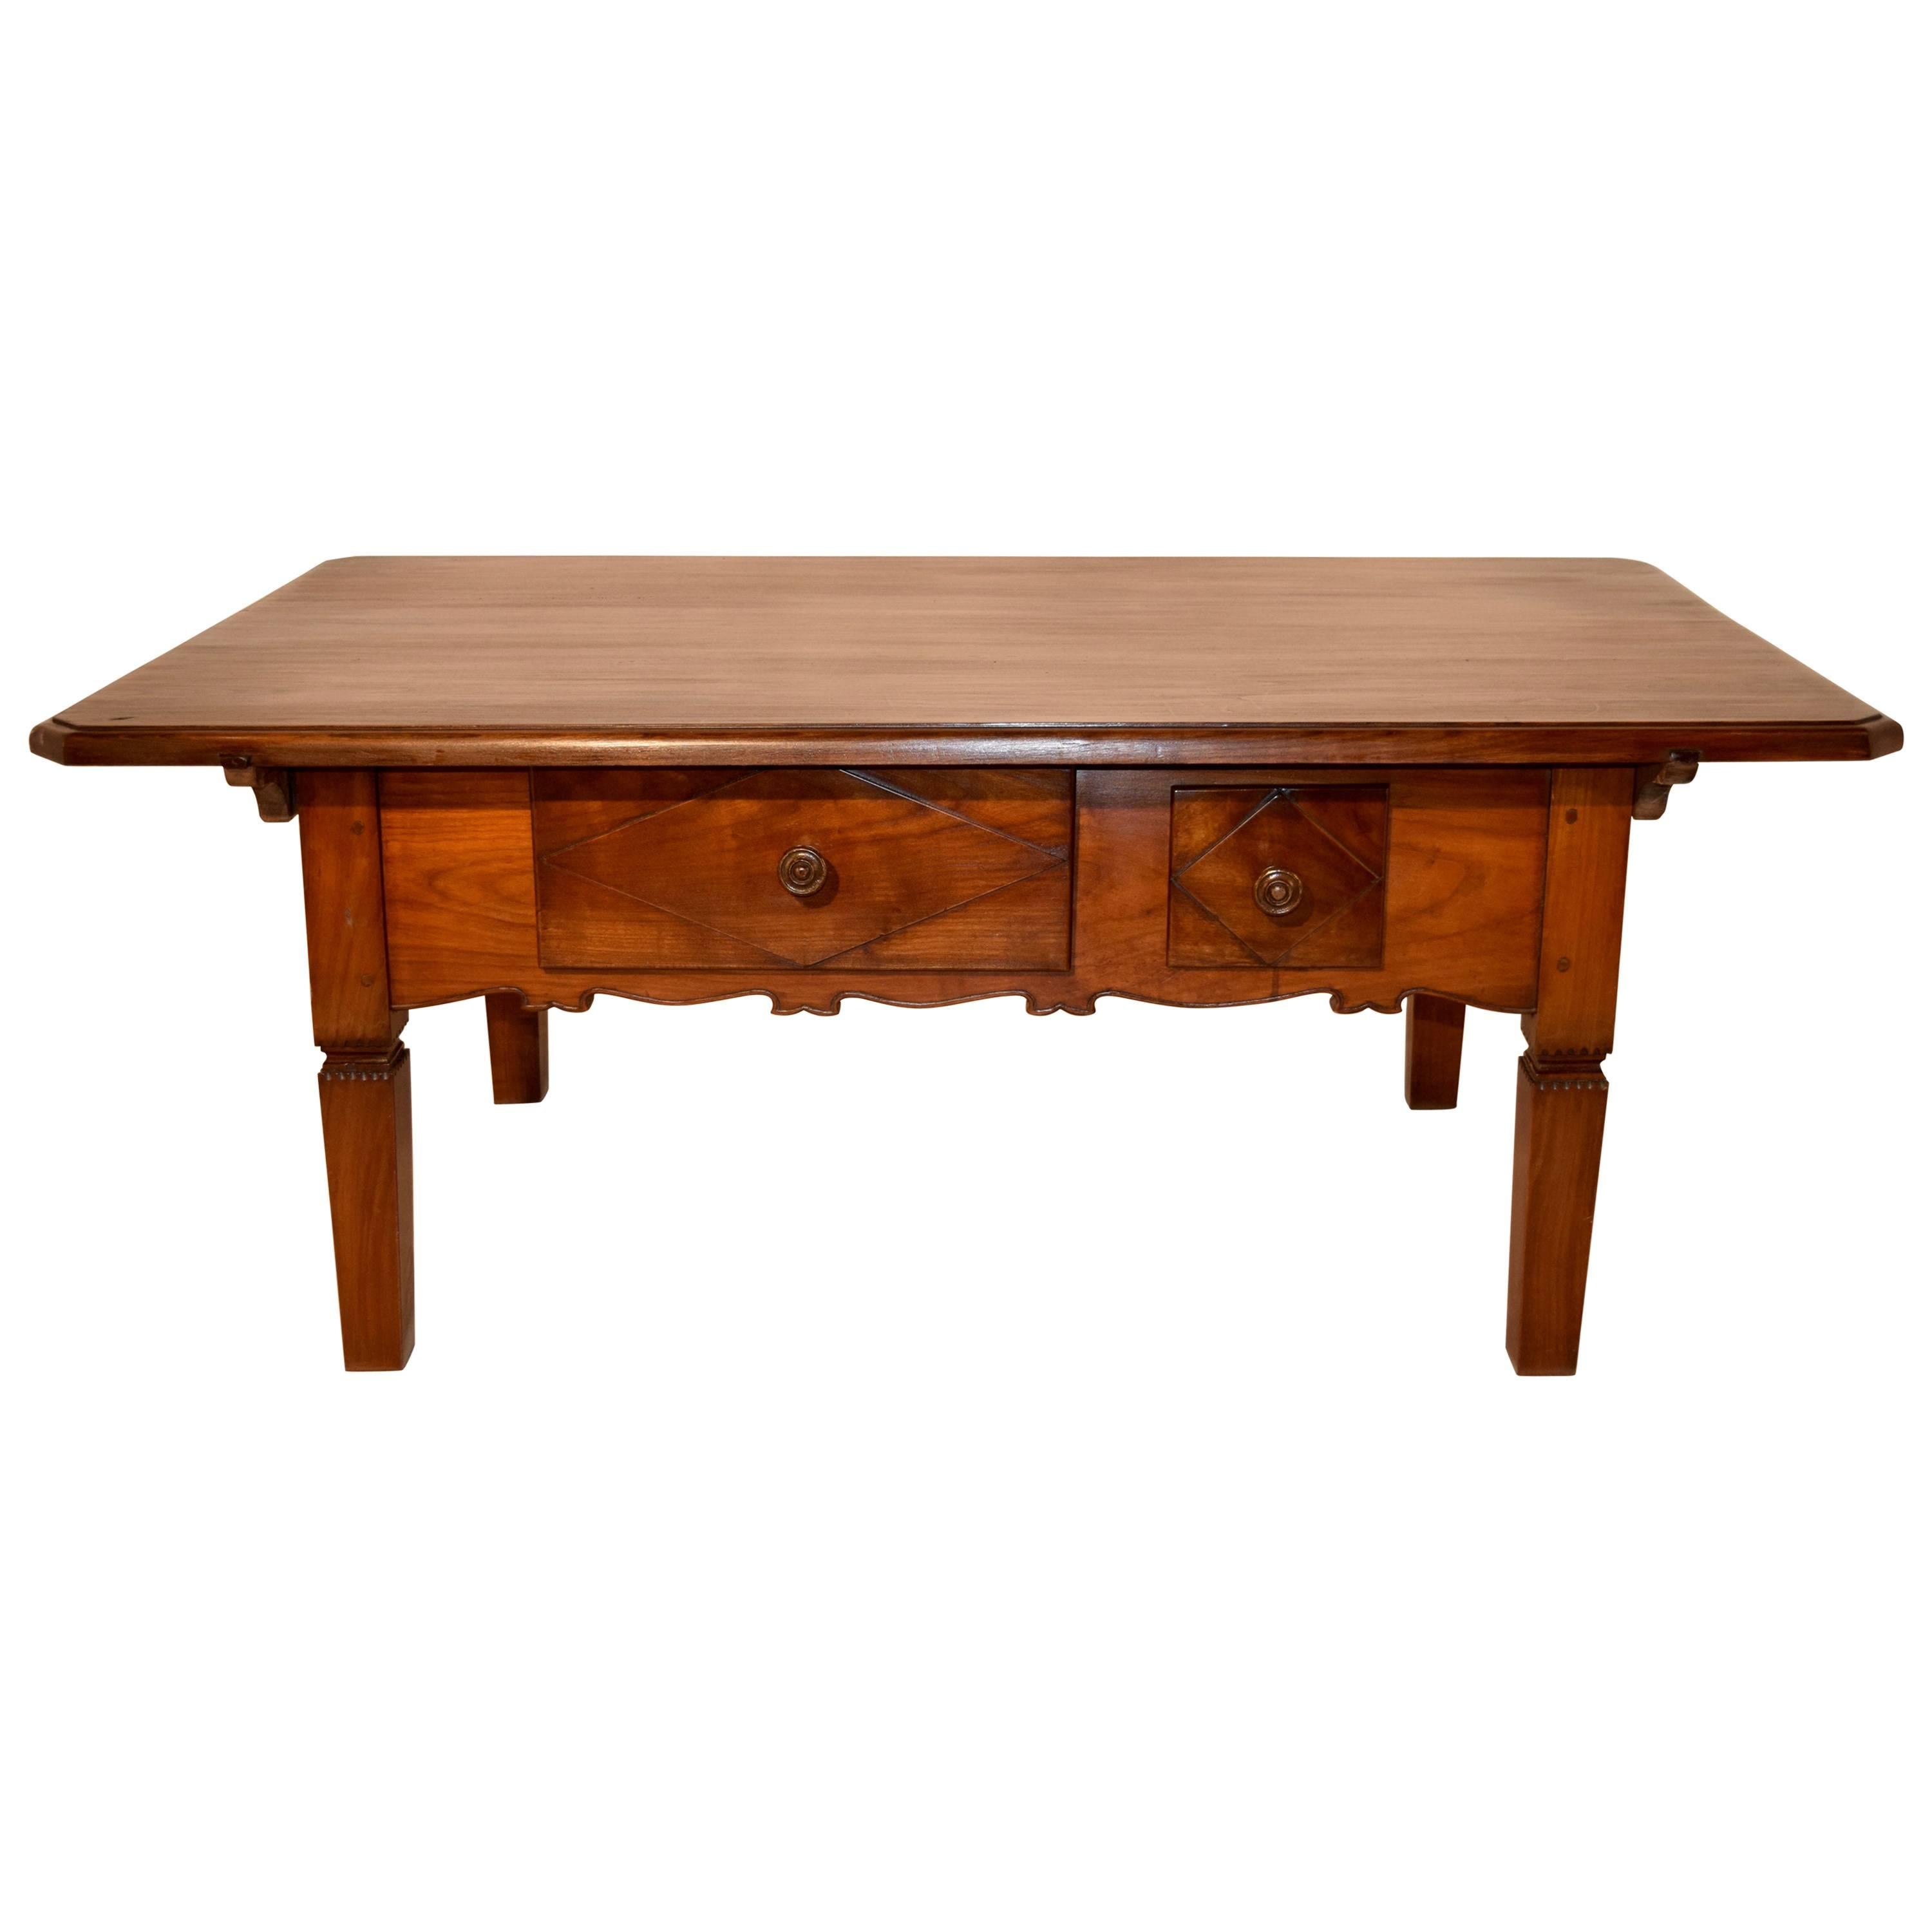 19th Century Swiss Cherry Coffee Table with Two Drawers